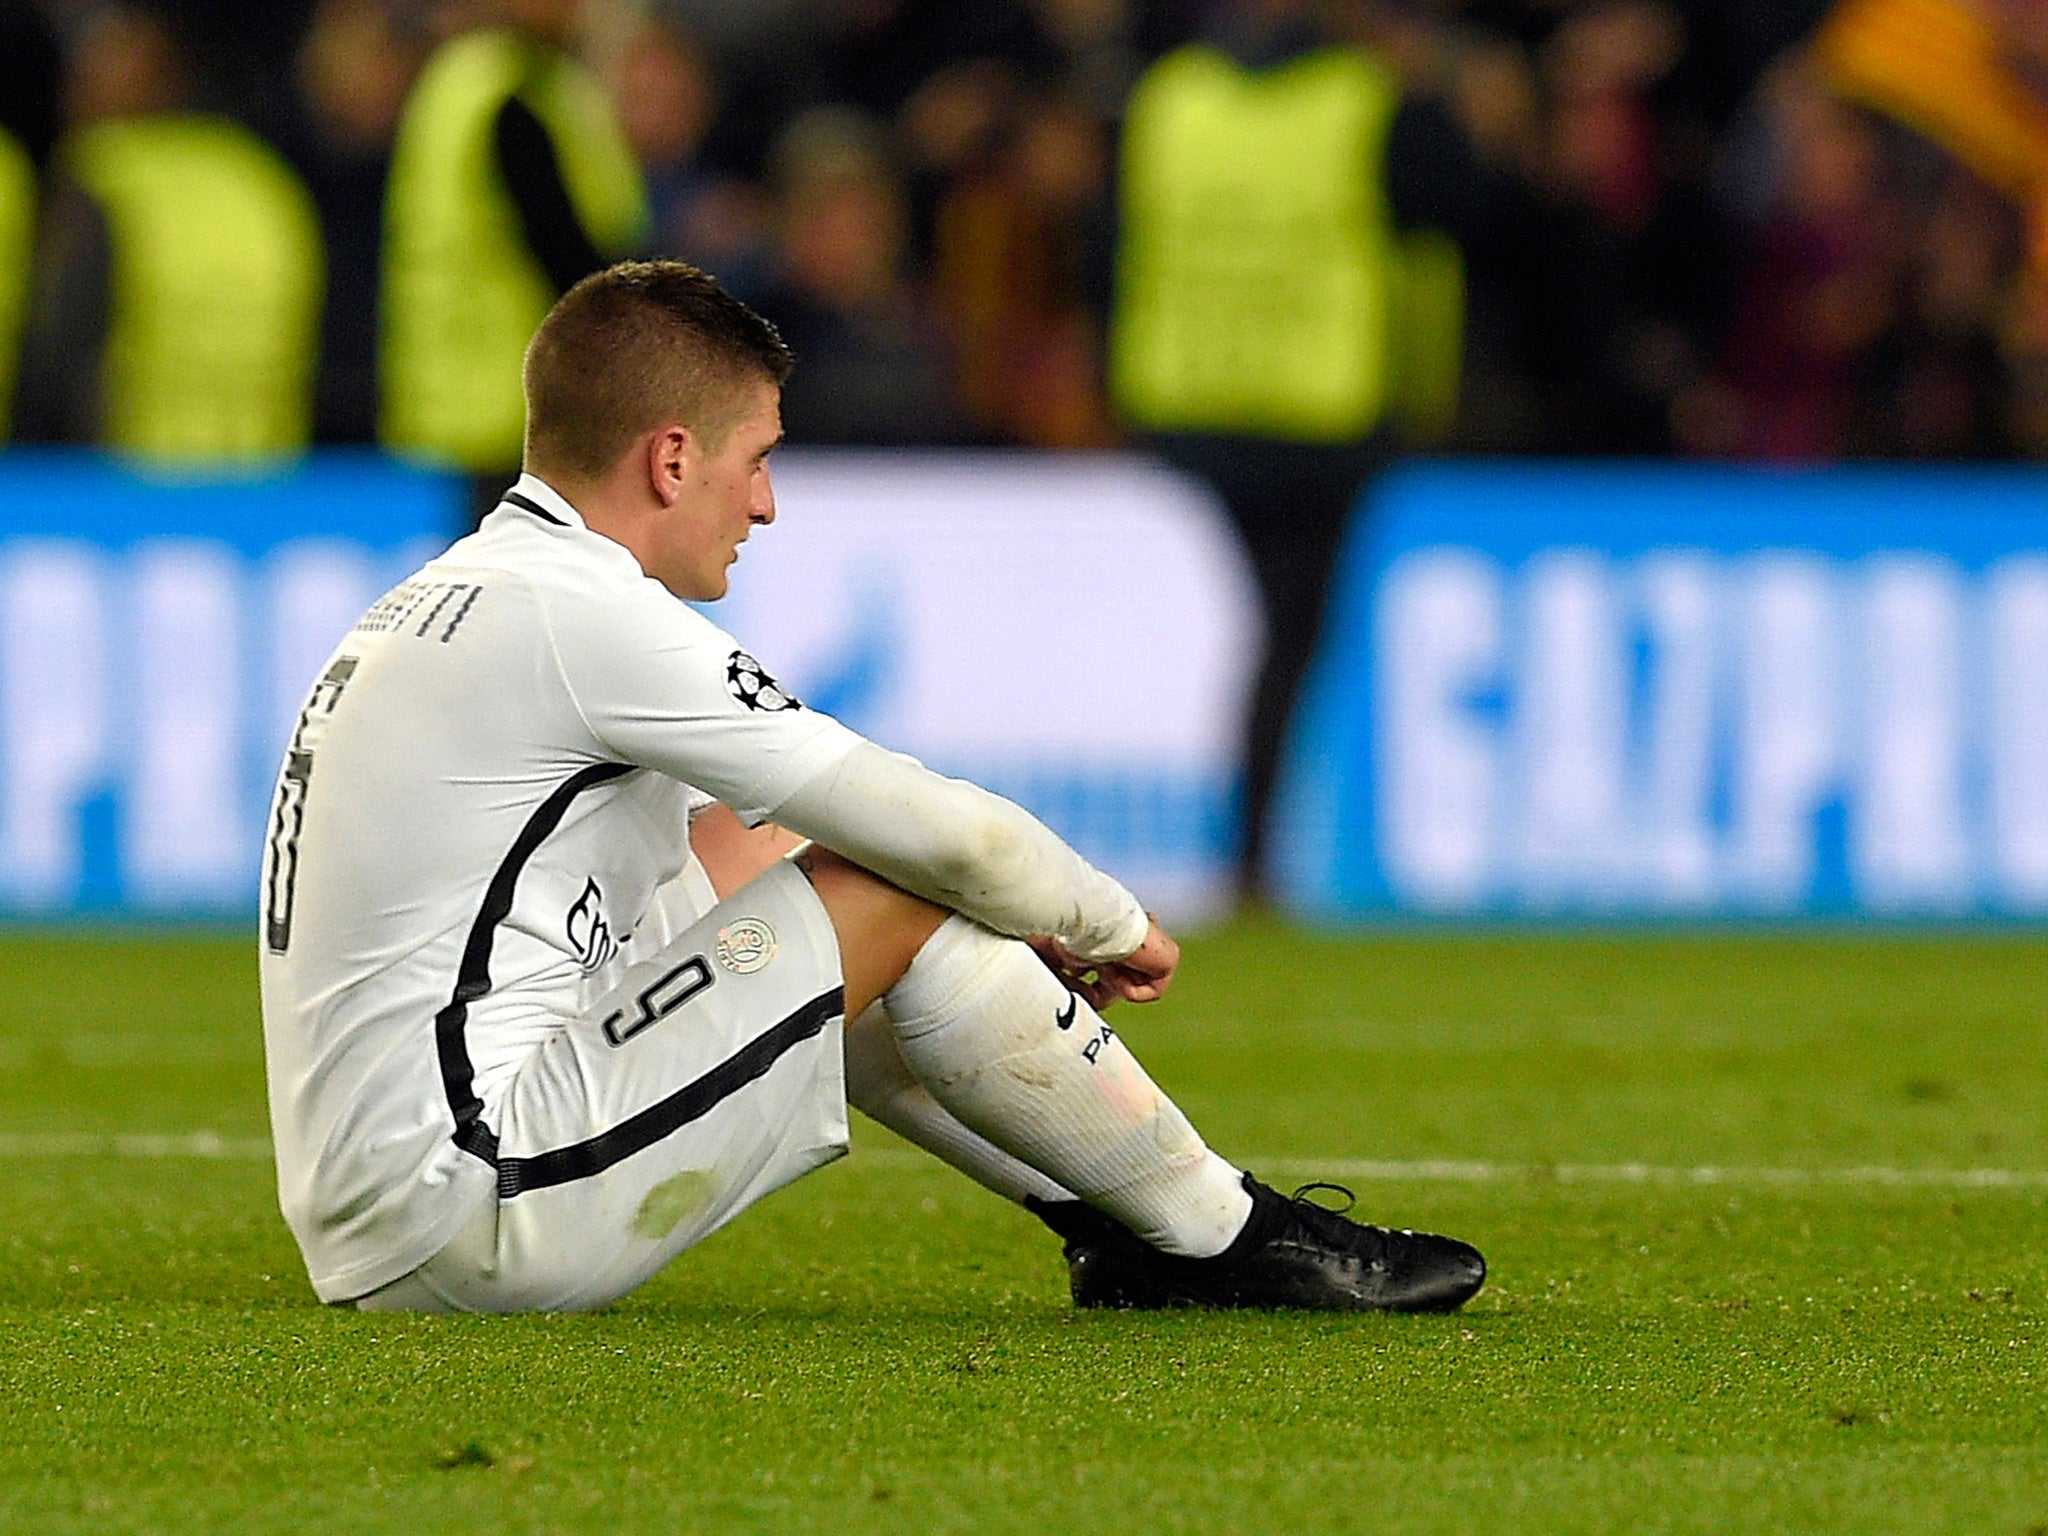 &#13;
Verratti's future could change the direction of major clubs for the next decade &#13;